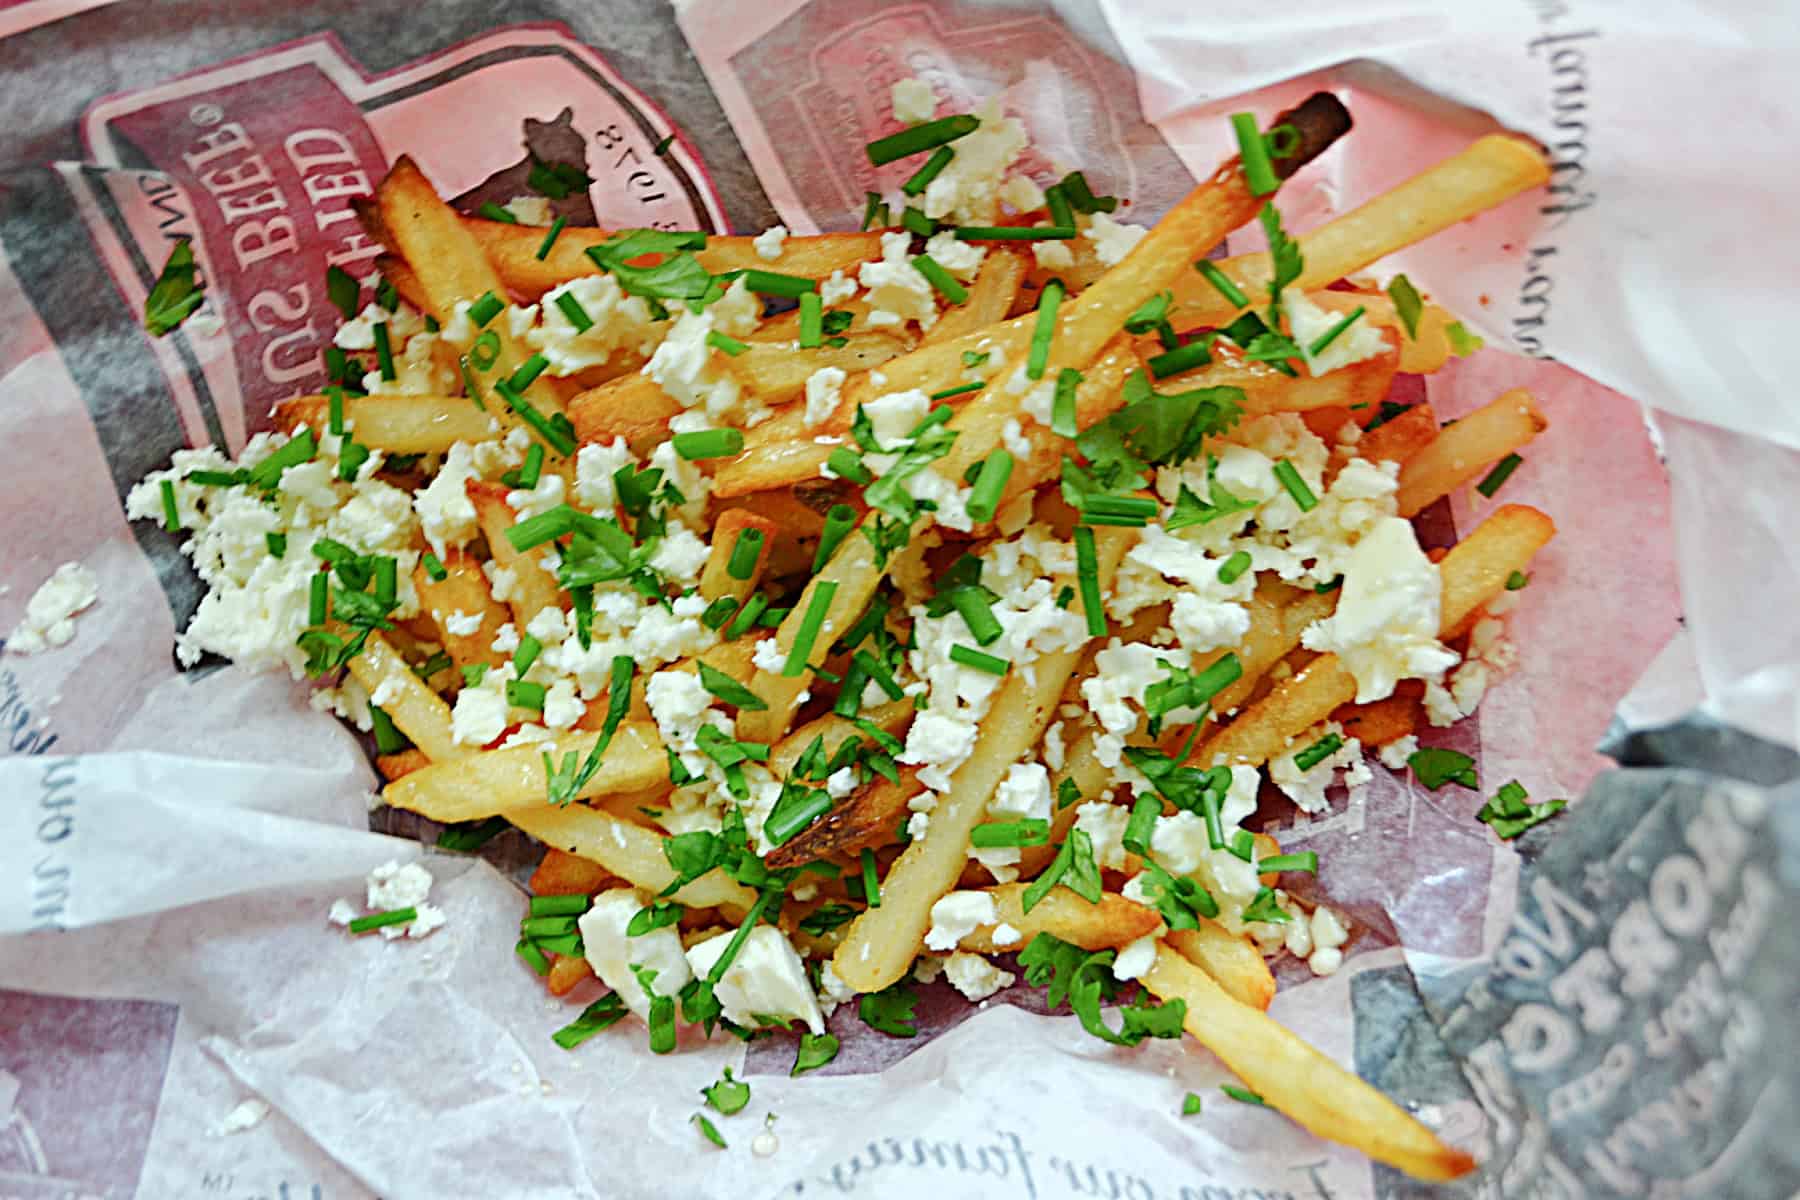 A close up of a pile of french fries with herbs and feta on top.